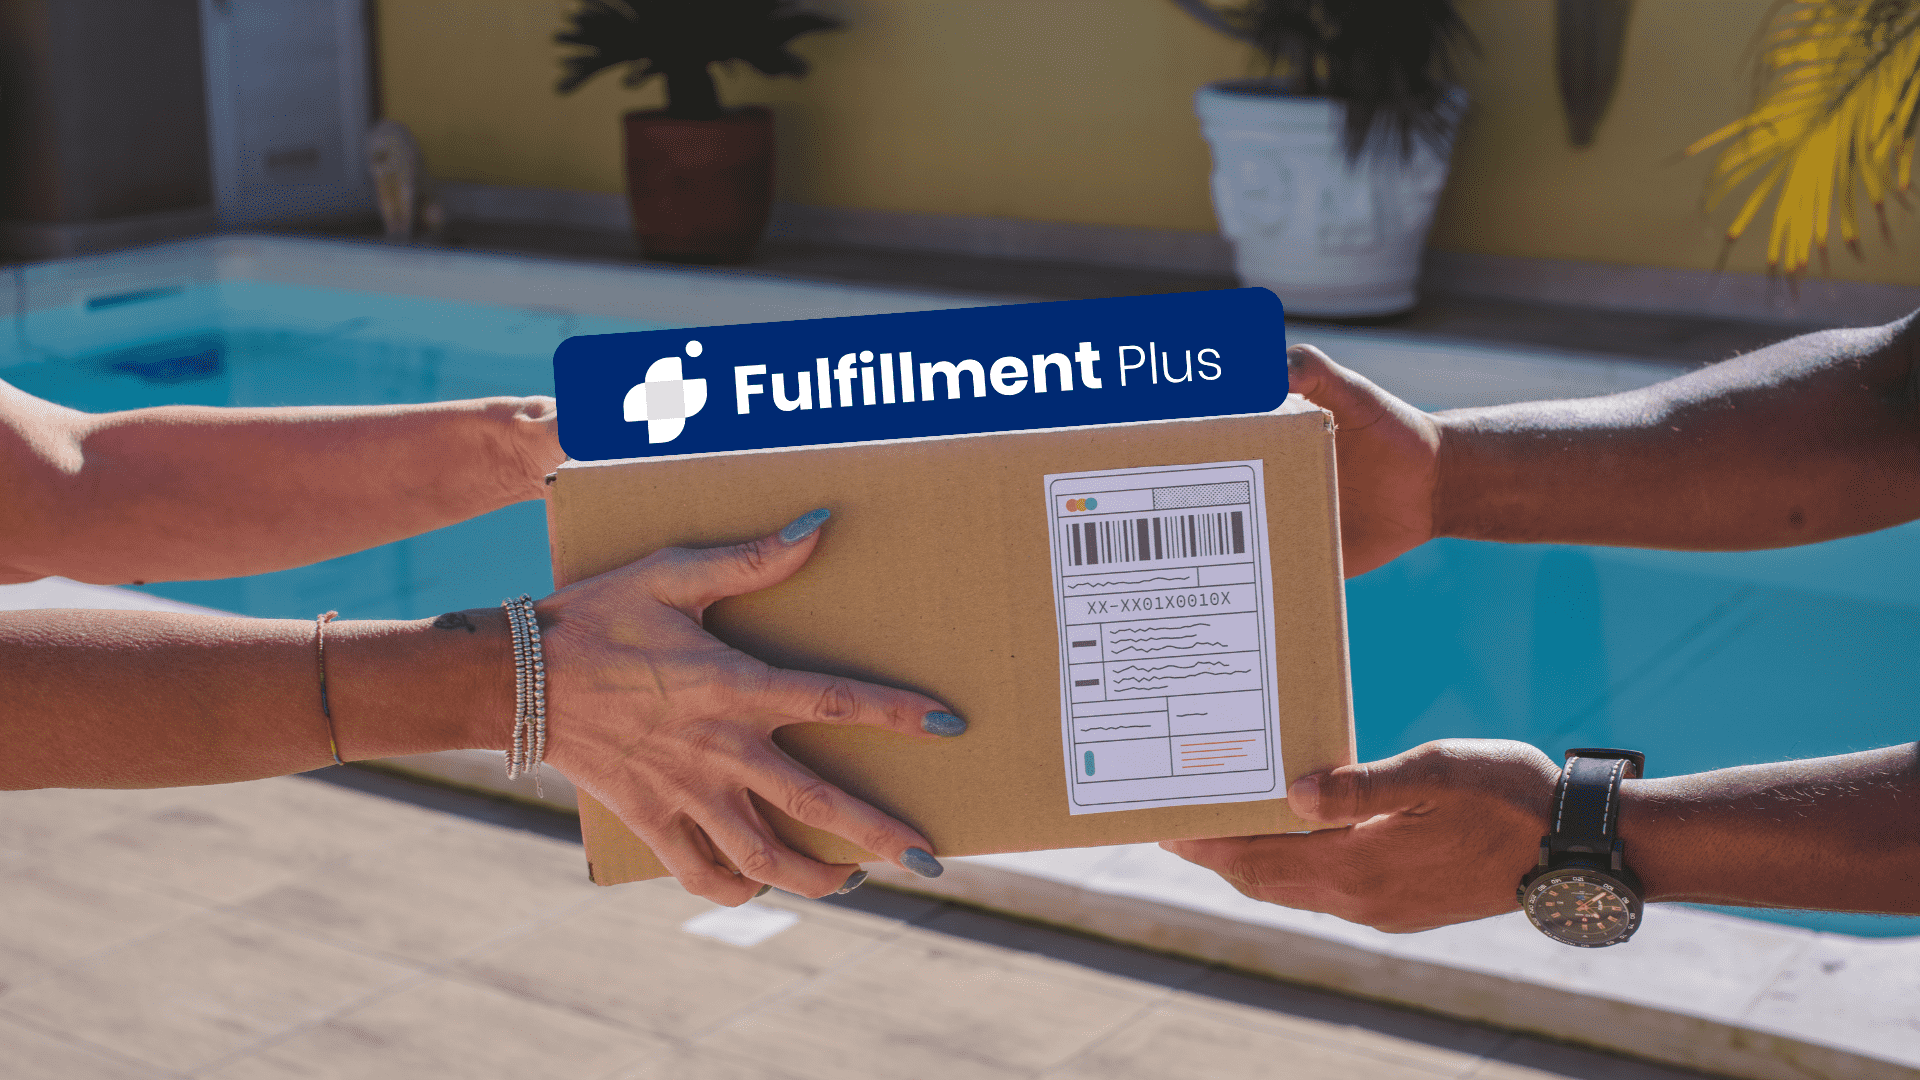 Promotional image of Fulfillment Plus, one of the best fulfillment companies in New York, displaying their vast warehouse and dedicated staff